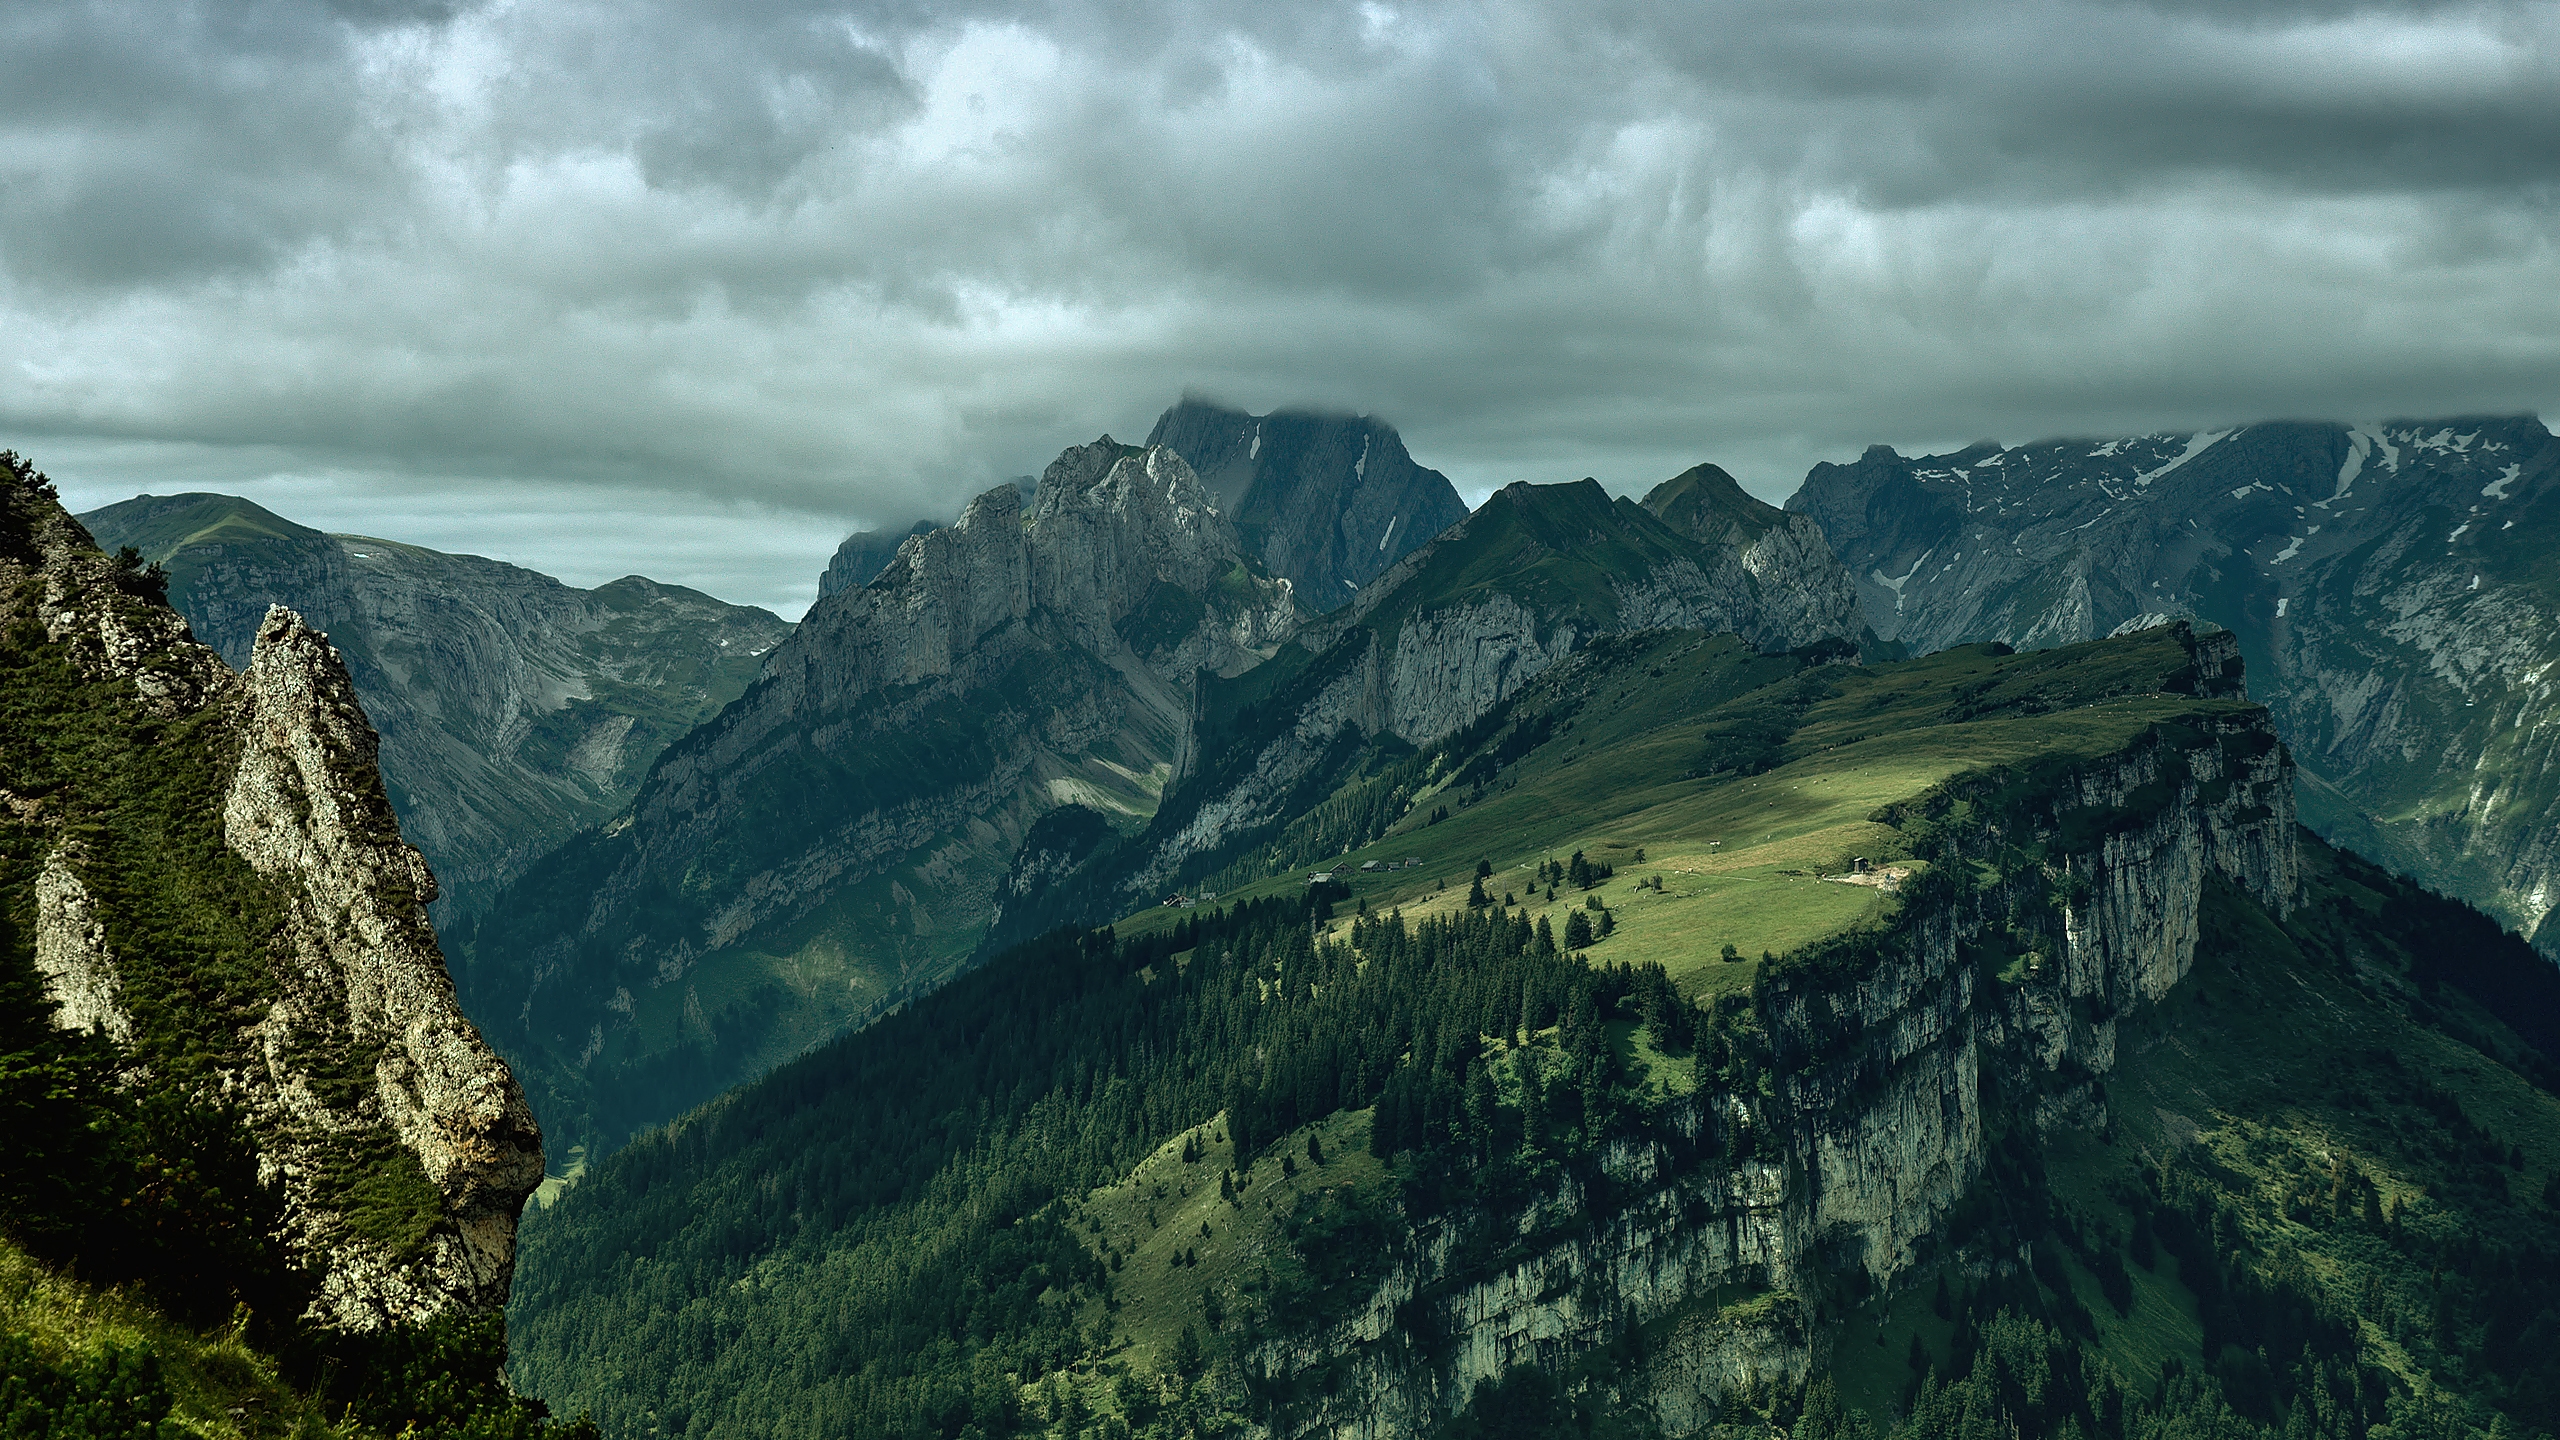 Mountains Landscape for 2560x1440 HDTV resolution